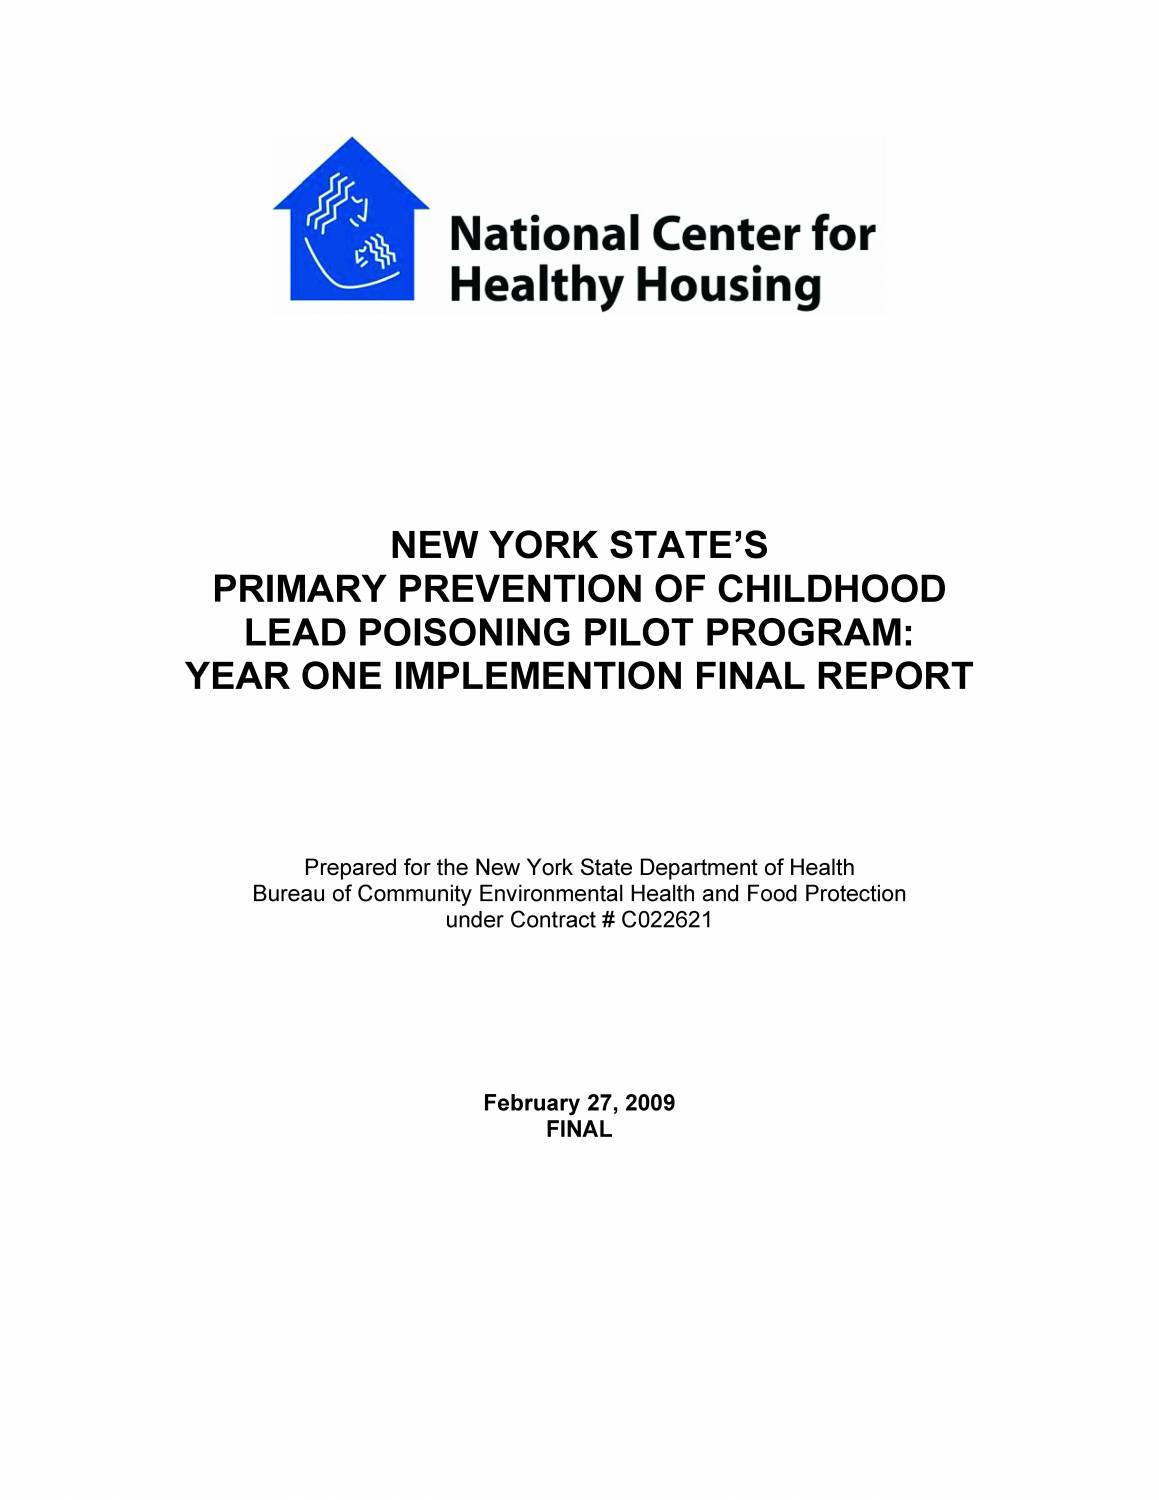 New York State's Primary Prevention of Childhood Lead Poisoning Pilot Program Year One Implementation Final Report